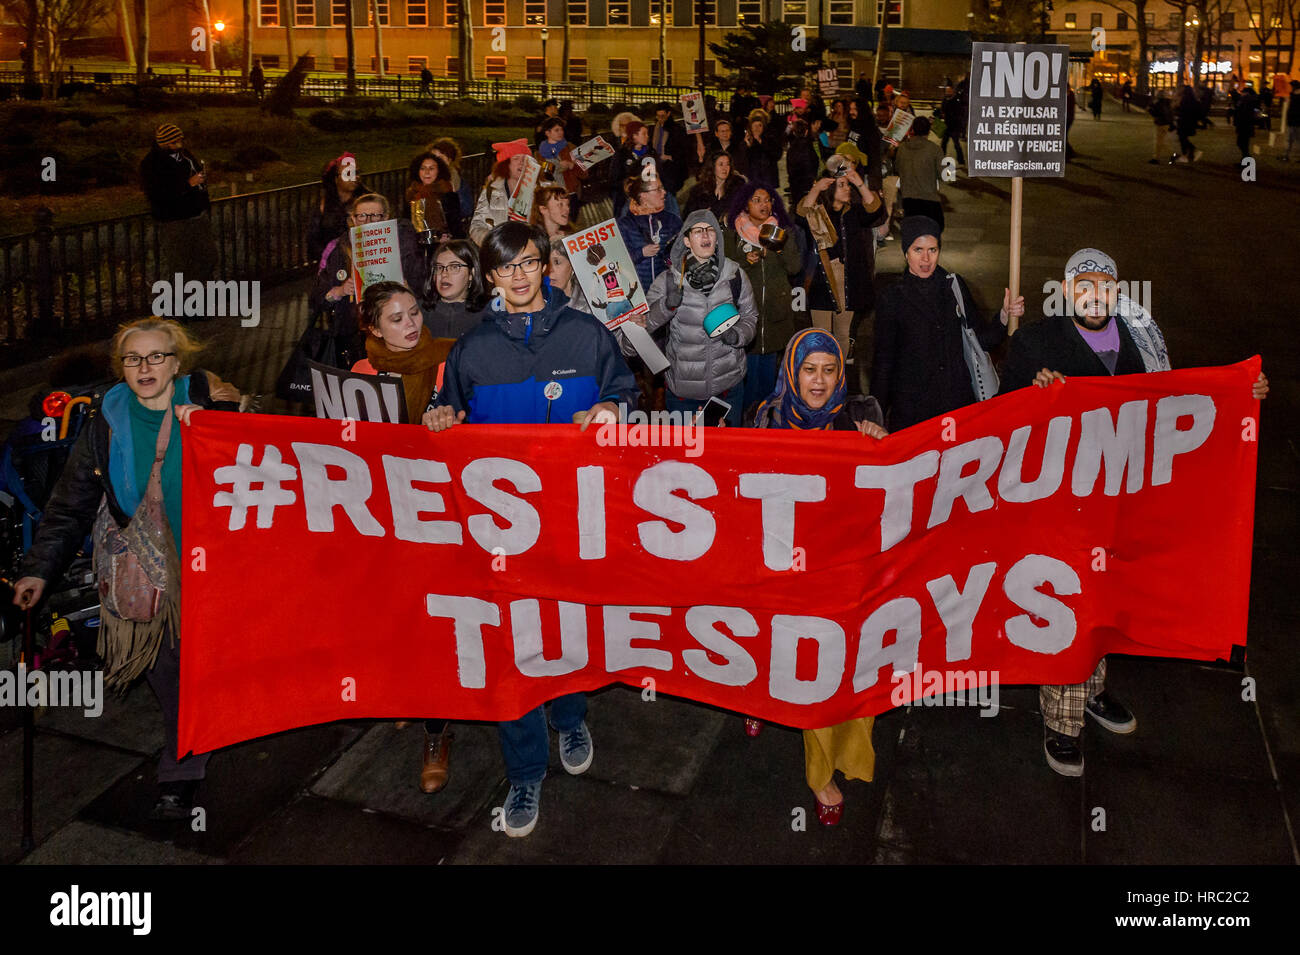 New York, USA. 28th Feb, 2017. Thousands of people gathered at Congressional offices and at town squares across the country to respond to Trump's first address to a joint session of Congress tonight with their own People's Address. In New York City the People's Address event was held at Brooklyn Borough Hall with a 'Cacerolazo!', a form of protest popular in Latin American countries, that consists of a group of people making noise by banging pots, pans and utensils to express dissent (in this case) to Trump's speech that will undermine communities. Credit: PACIFIC PRESS/Alamy Live News Stock Photo